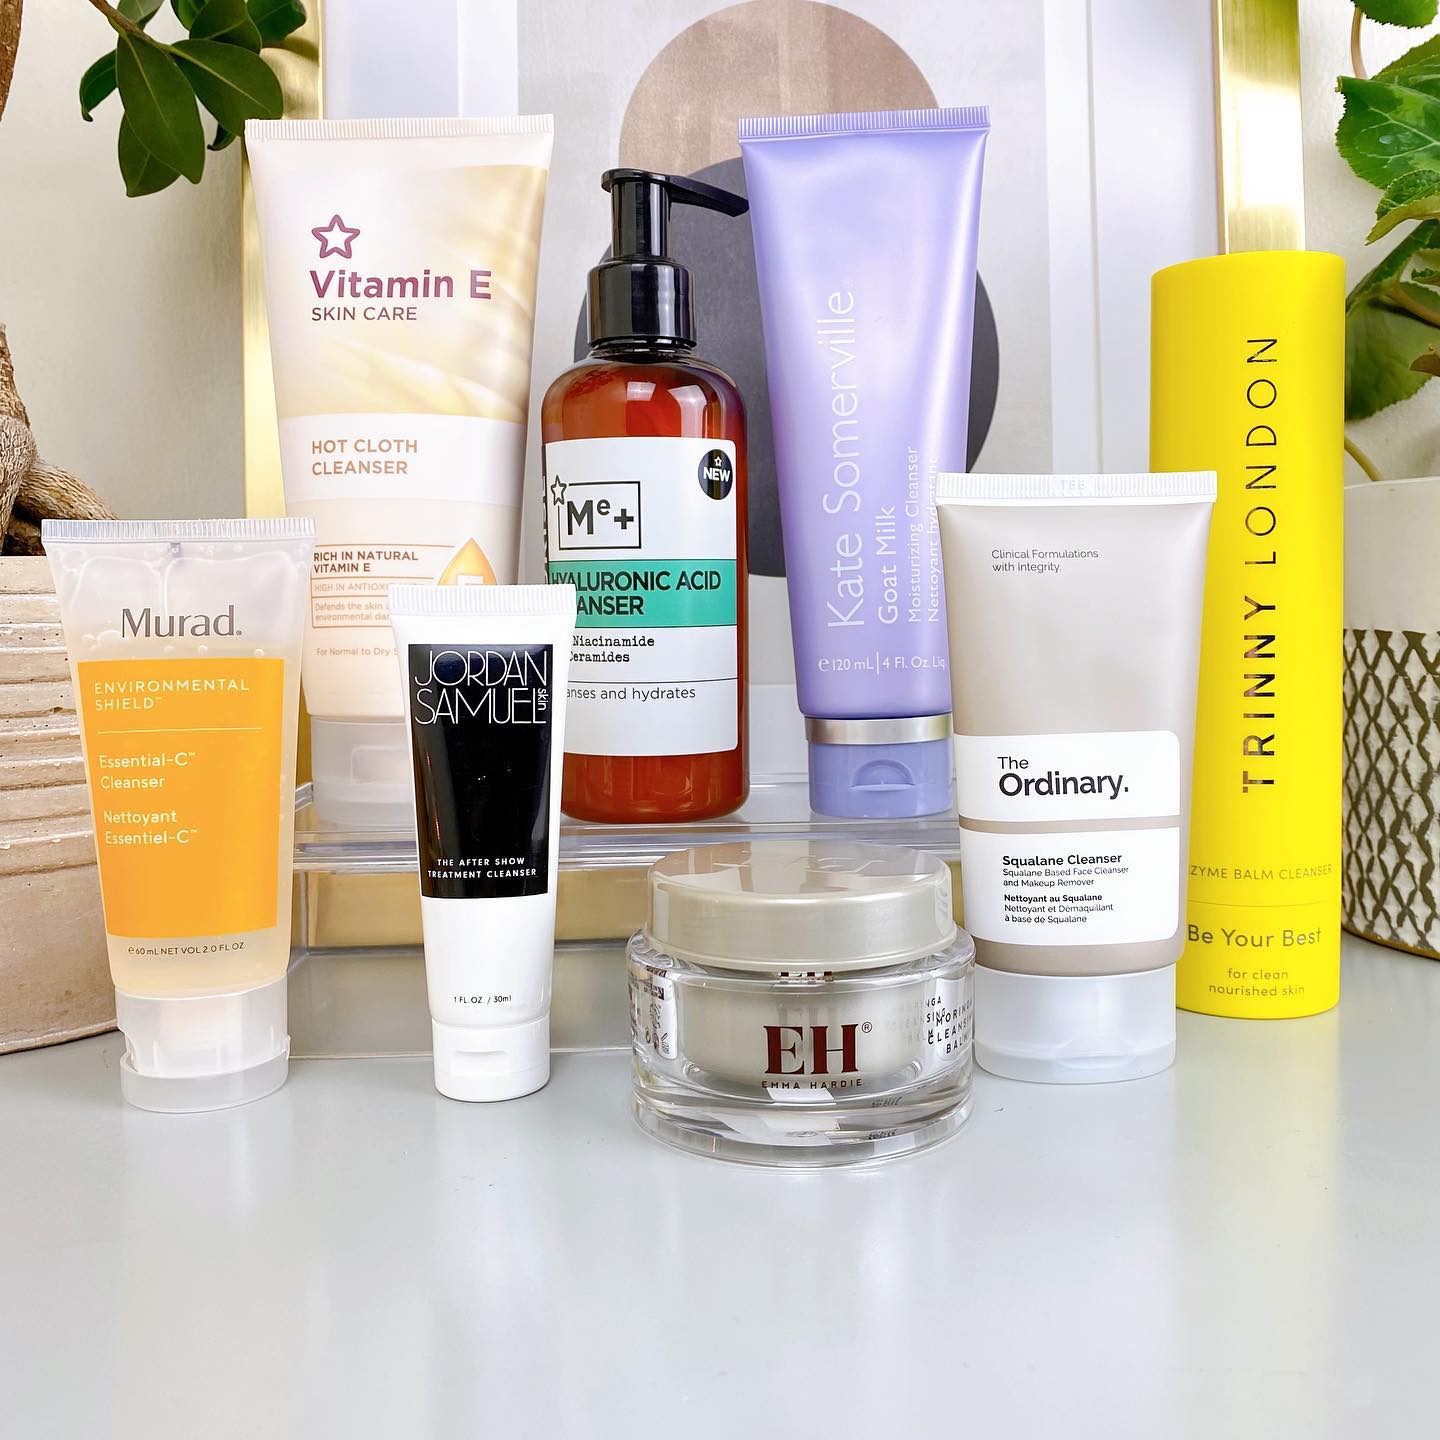 Murad Essential-C Cleanser Superdrug Vitamin E Hot Cloth Cleanser Superdrug Hyaluronic Acid Cleanser Jordan Samuel Skin The After Show Treatment Cleanser Kate Somerville Goat Milk Cleanser Emma Hardie Moringa Cleansing Balm The Ordinary Squalane Cleanser Trinny London Be Your Best Enzyme Balm Cleanser